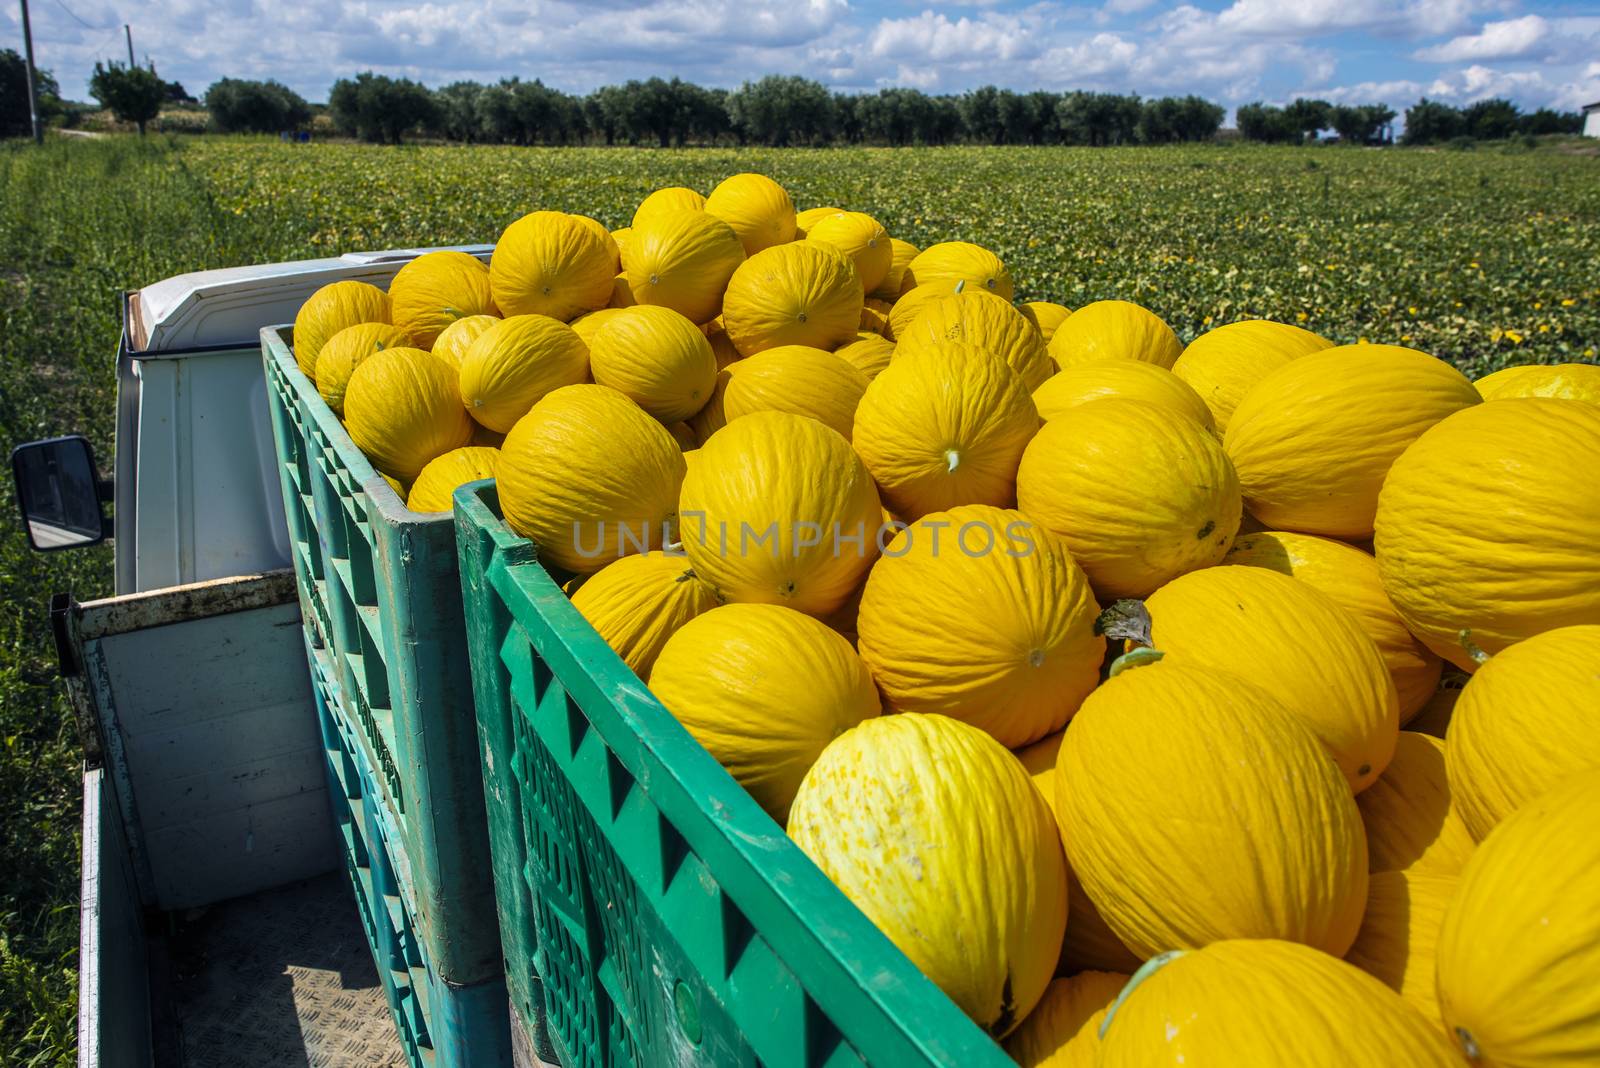 Canary yellow melons in crate loaded on truck from the farm. Transport melons from the plantation. Sunny day.